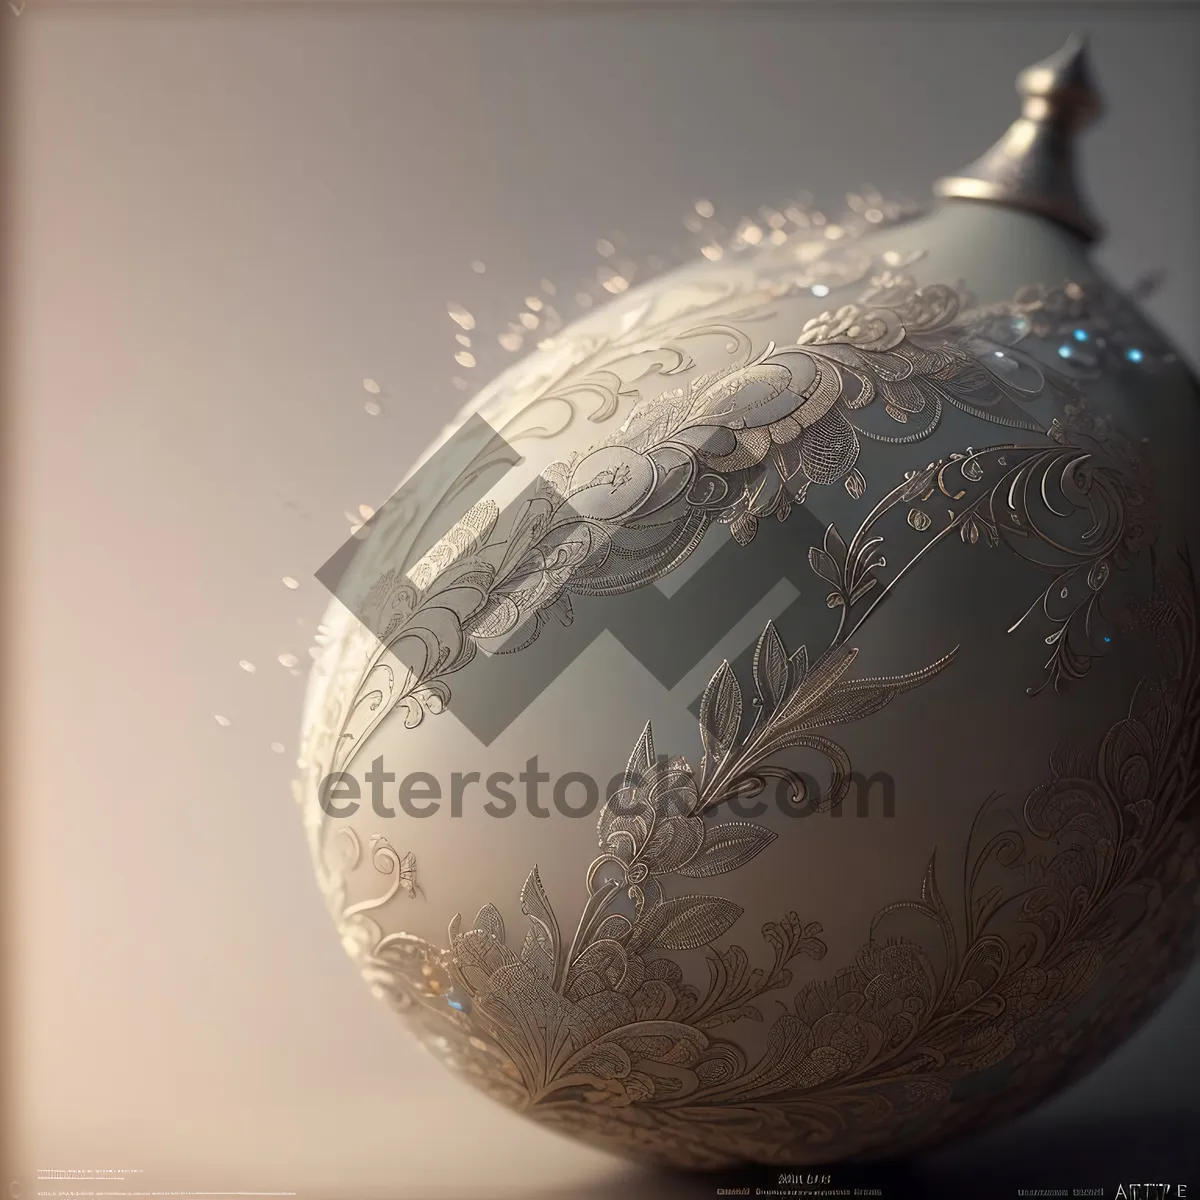 Picture of Festive Earth ornament with glass bangle.